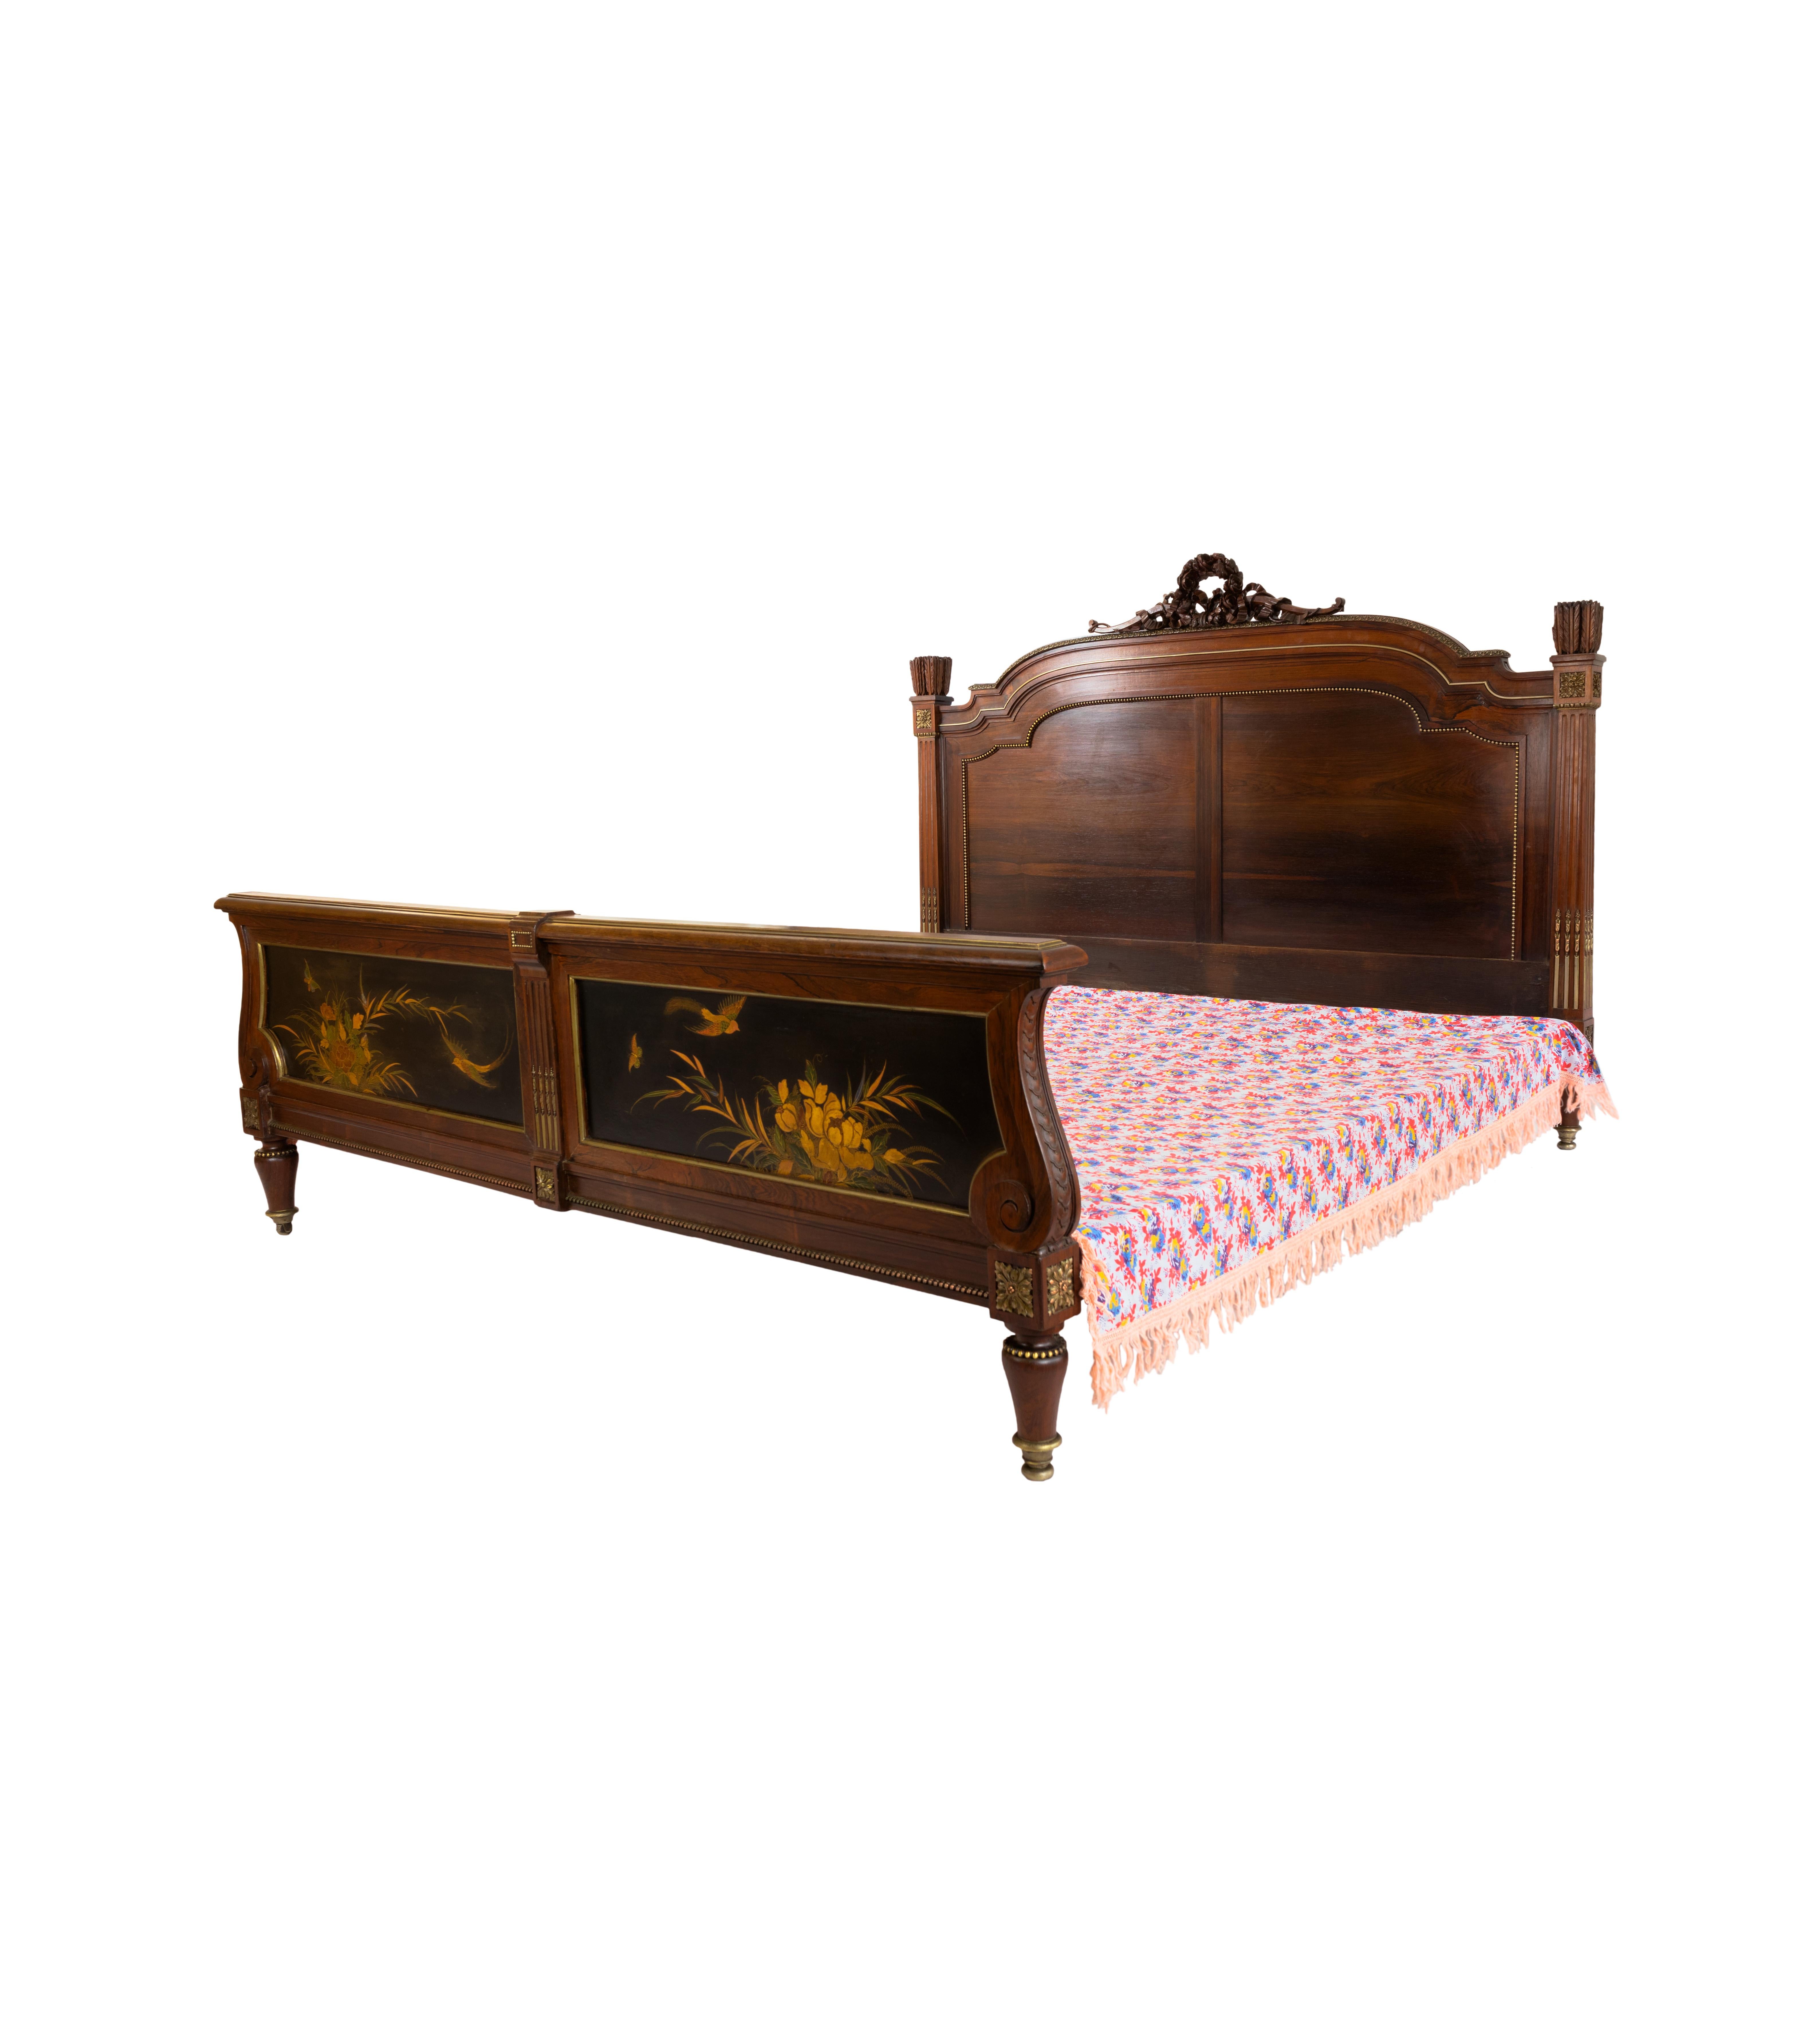 A rare 19th Century Napoleon III period french palatial King sized bed in solid high quality tropical wood (size 181.5 x 210 cm) with painted floral lacquer panels. Very rare period piece with a very large mattress space. (Does not include matress)